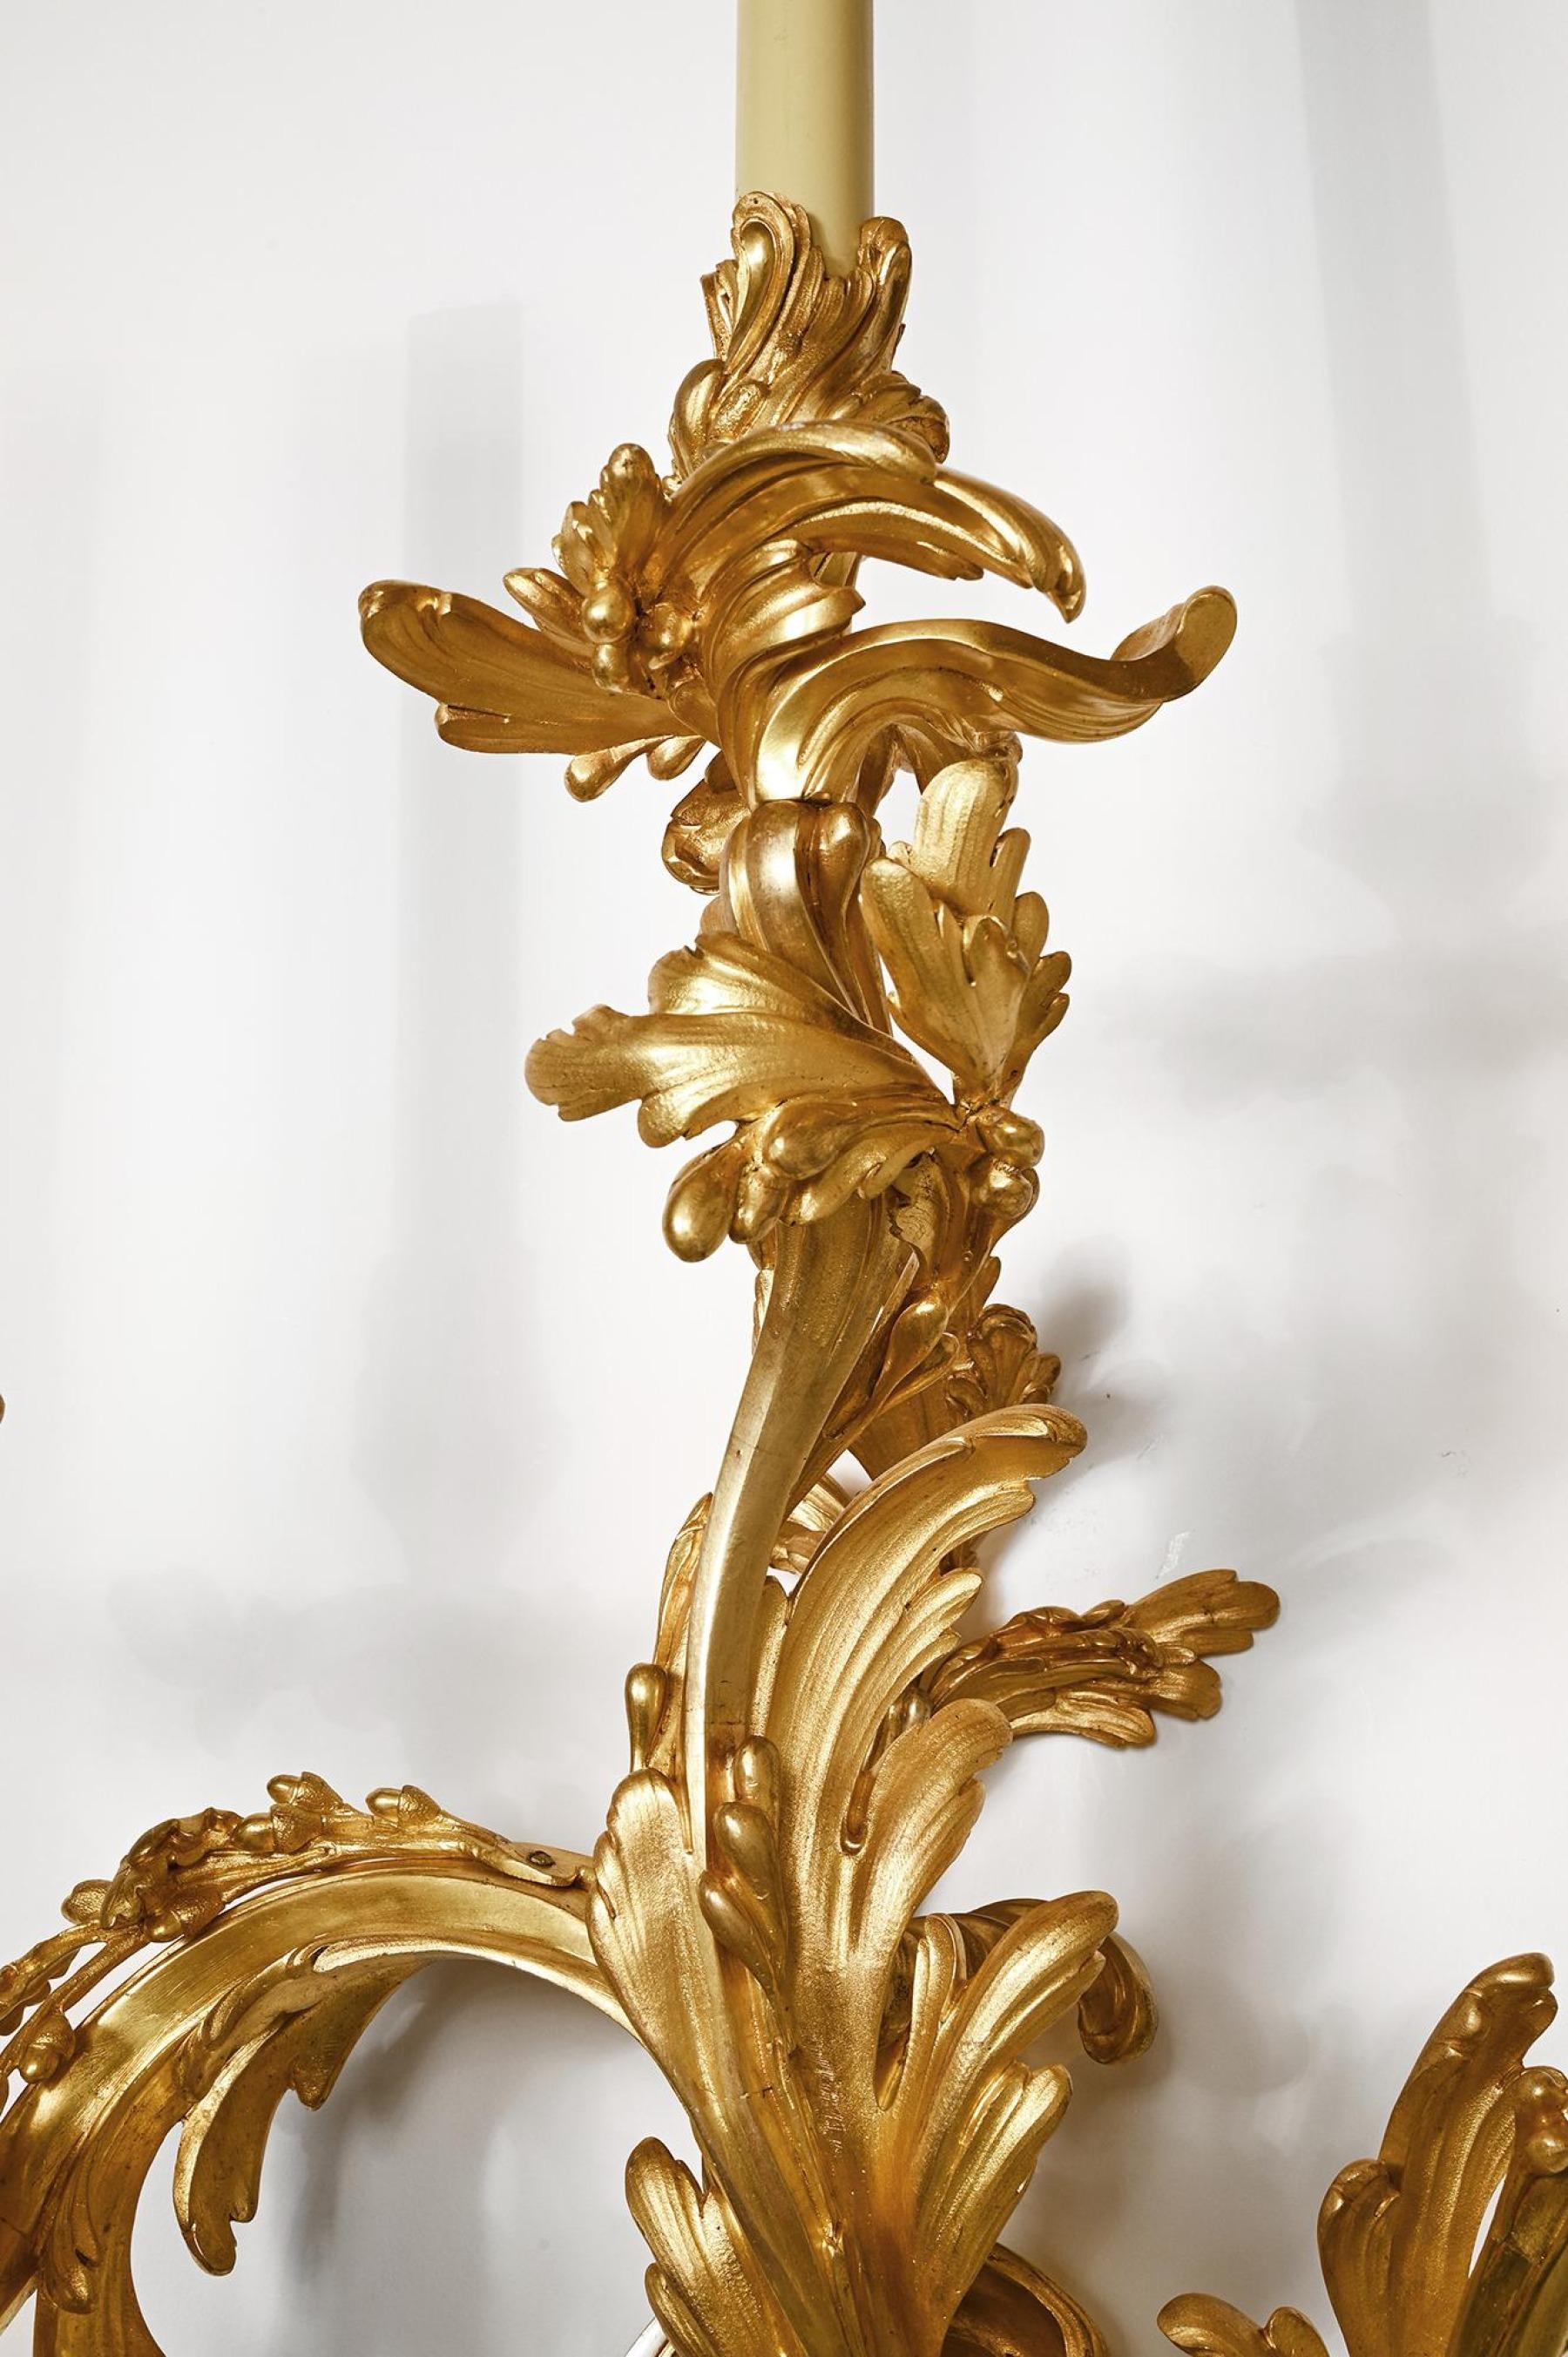 Pair of Large 19th Century French Three Branch Ormolu Wall Lights or Appliqués In Good Condition For Sale In Benington, Herts